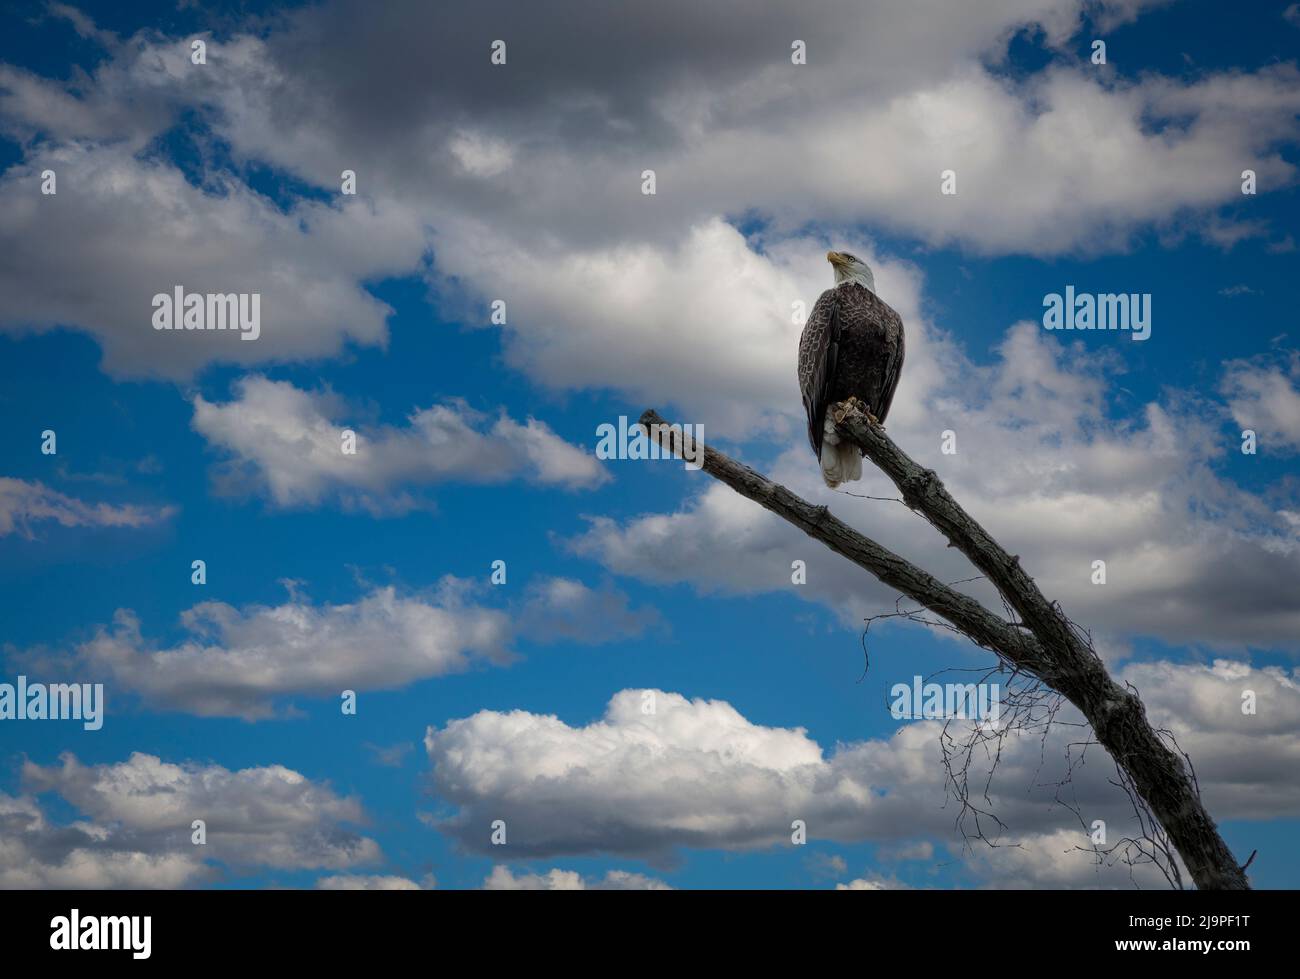 A View of A Bald Eagle Sitting on a Branch Looking Over the Land on a Sunny Day Stock Photo